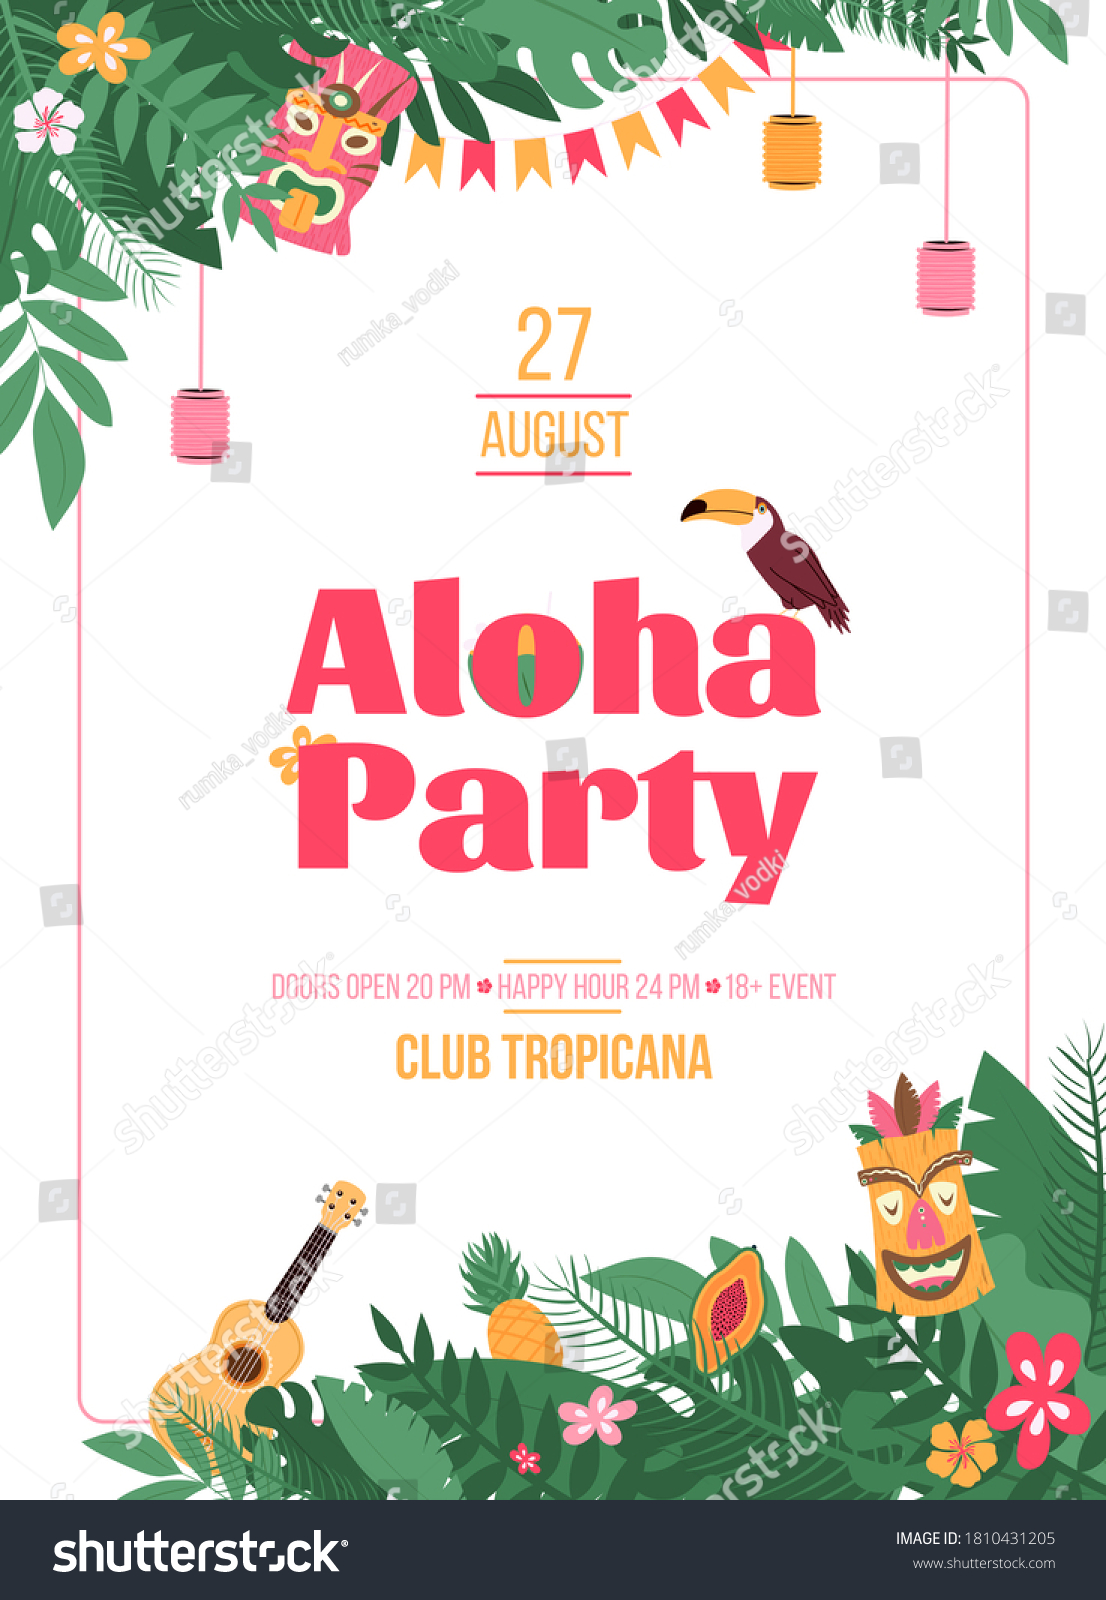 SVG of Invitation poster for Aloha Party in Hawaiian style with tropical leaves and Tiki mask, cartoon vector illustration. Summer party invitation template. svg